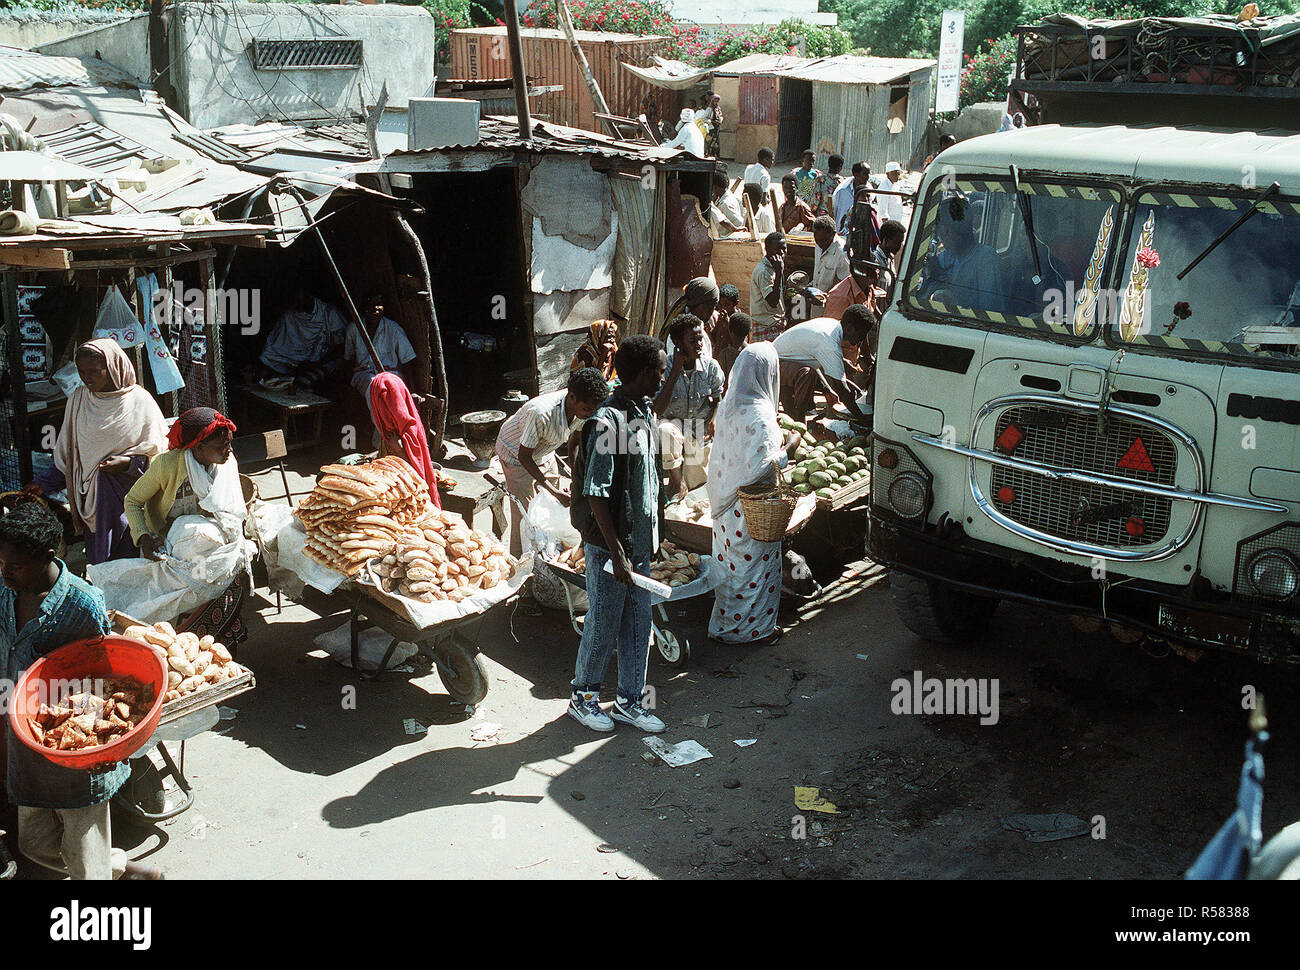 1992 - Somali vendors ply their wares on a busy city street during the multinational relief effort Operation Restore Hope. (Mogadishu Somalia) Stock Photo